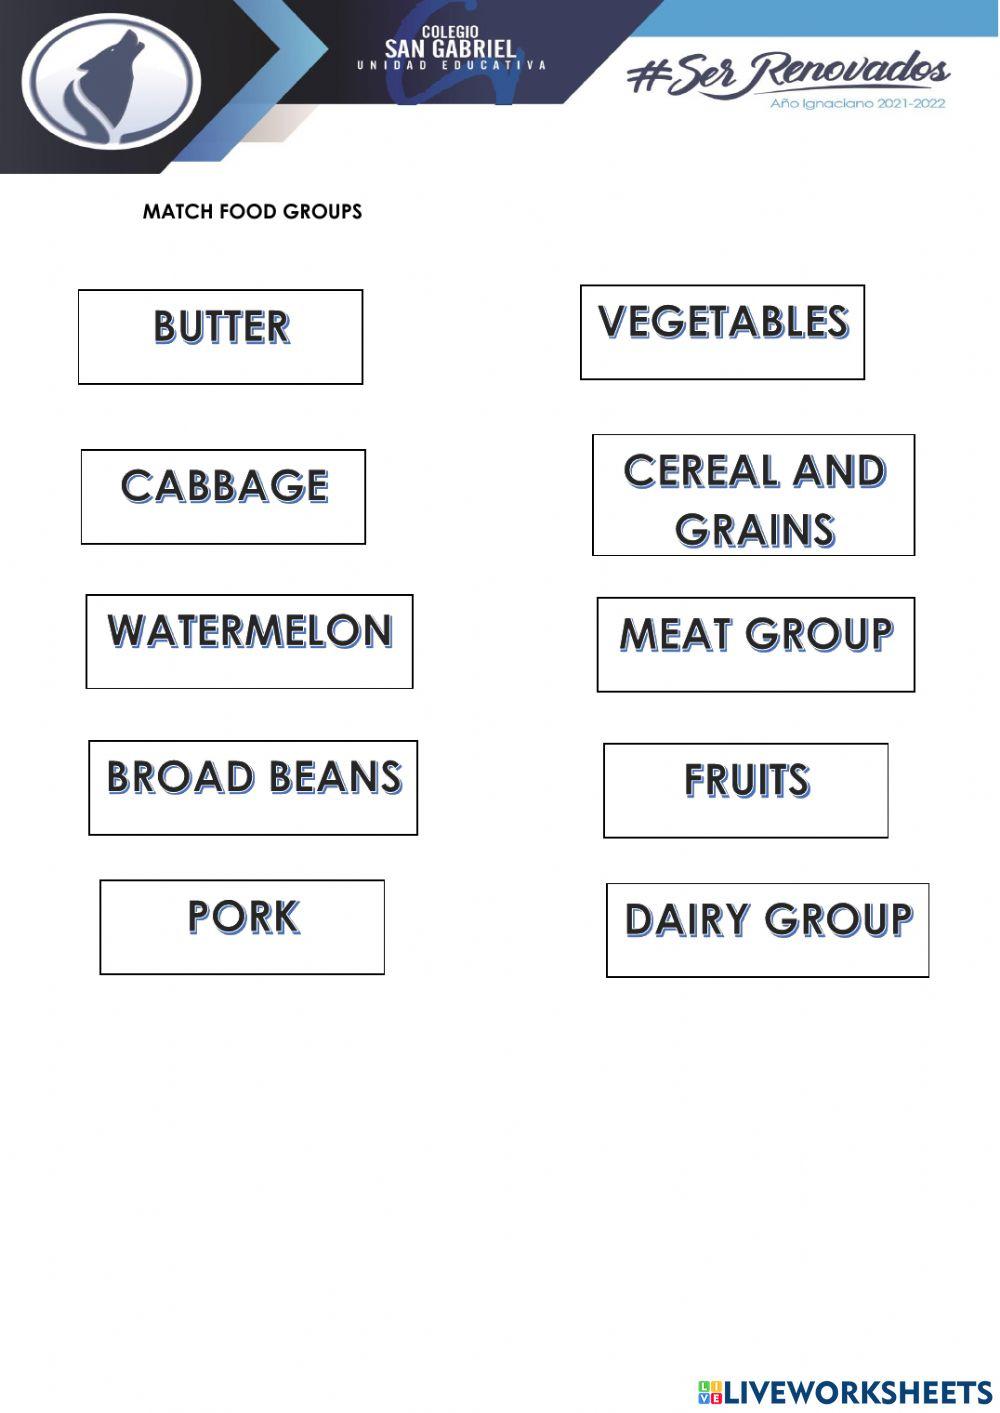 Dairy and protein group